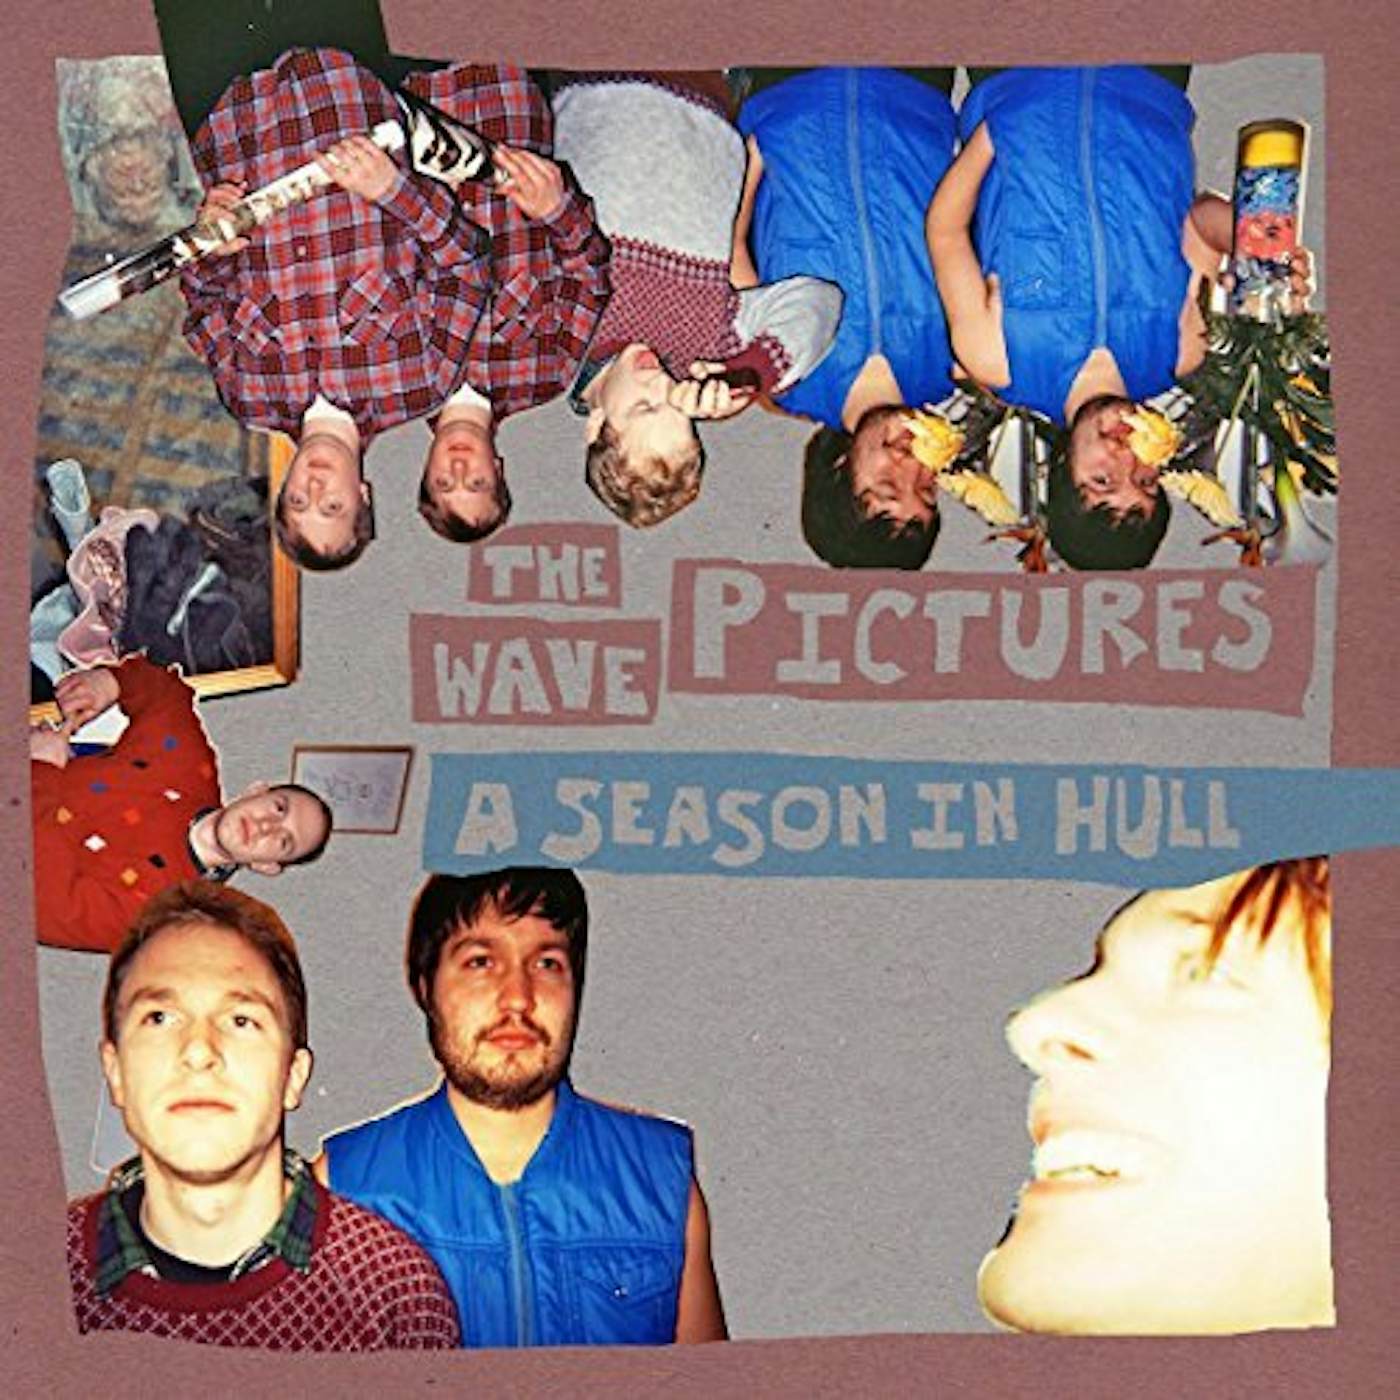 The Wave Pictures SEASON IN HULL Vinyl Record